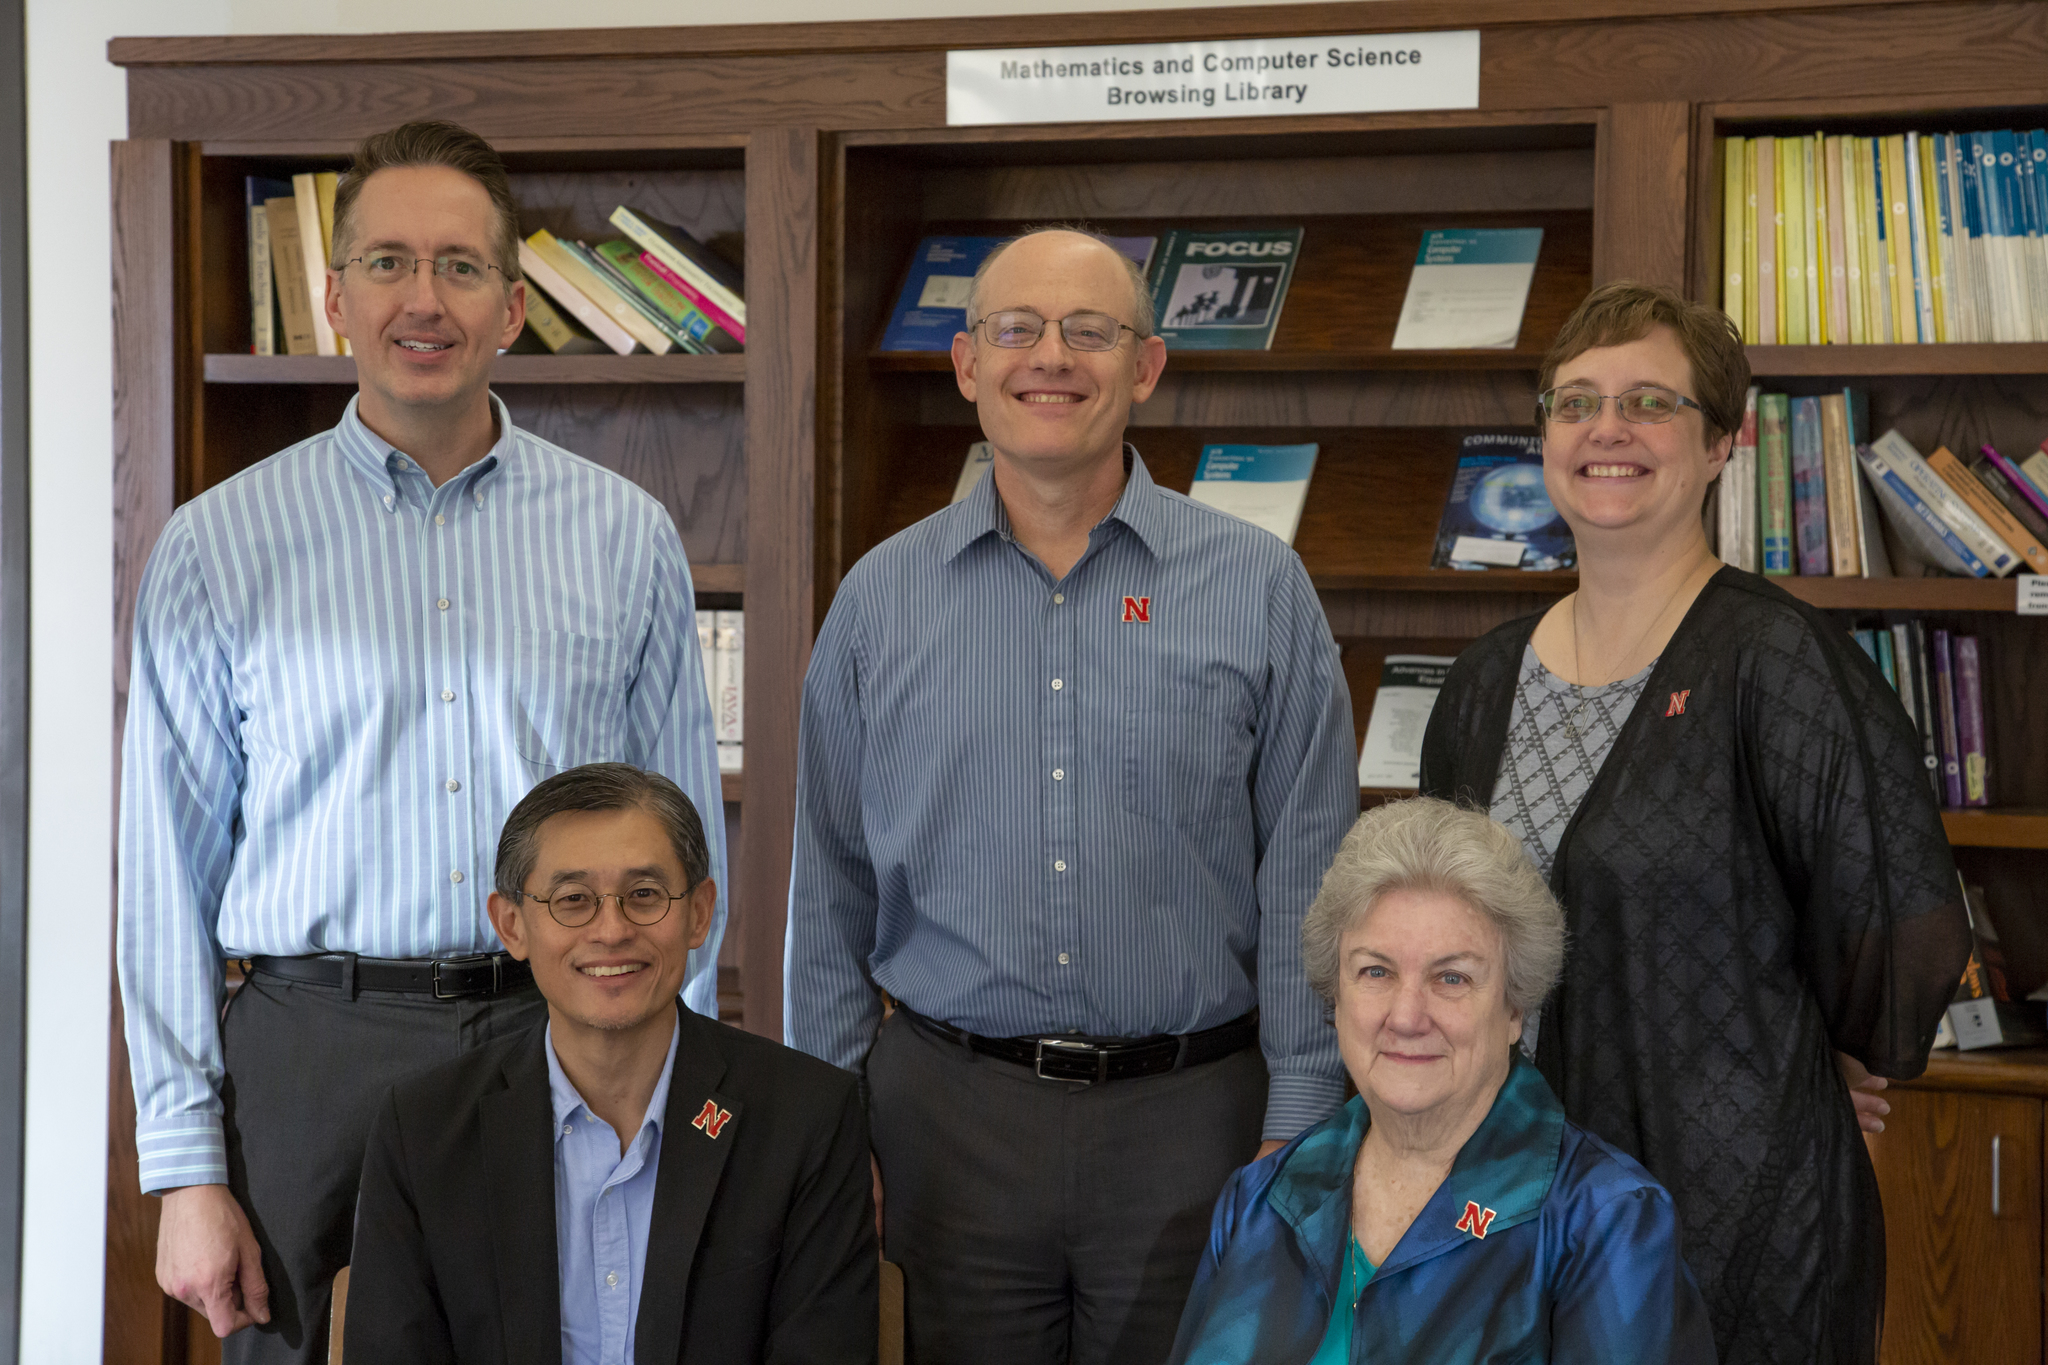 The research team includes (back row, from left) Kent Steen, Guy Trainin and Wendy Smith; (front row, from left) Leen-Kiat Soh and Gwen Nugent.